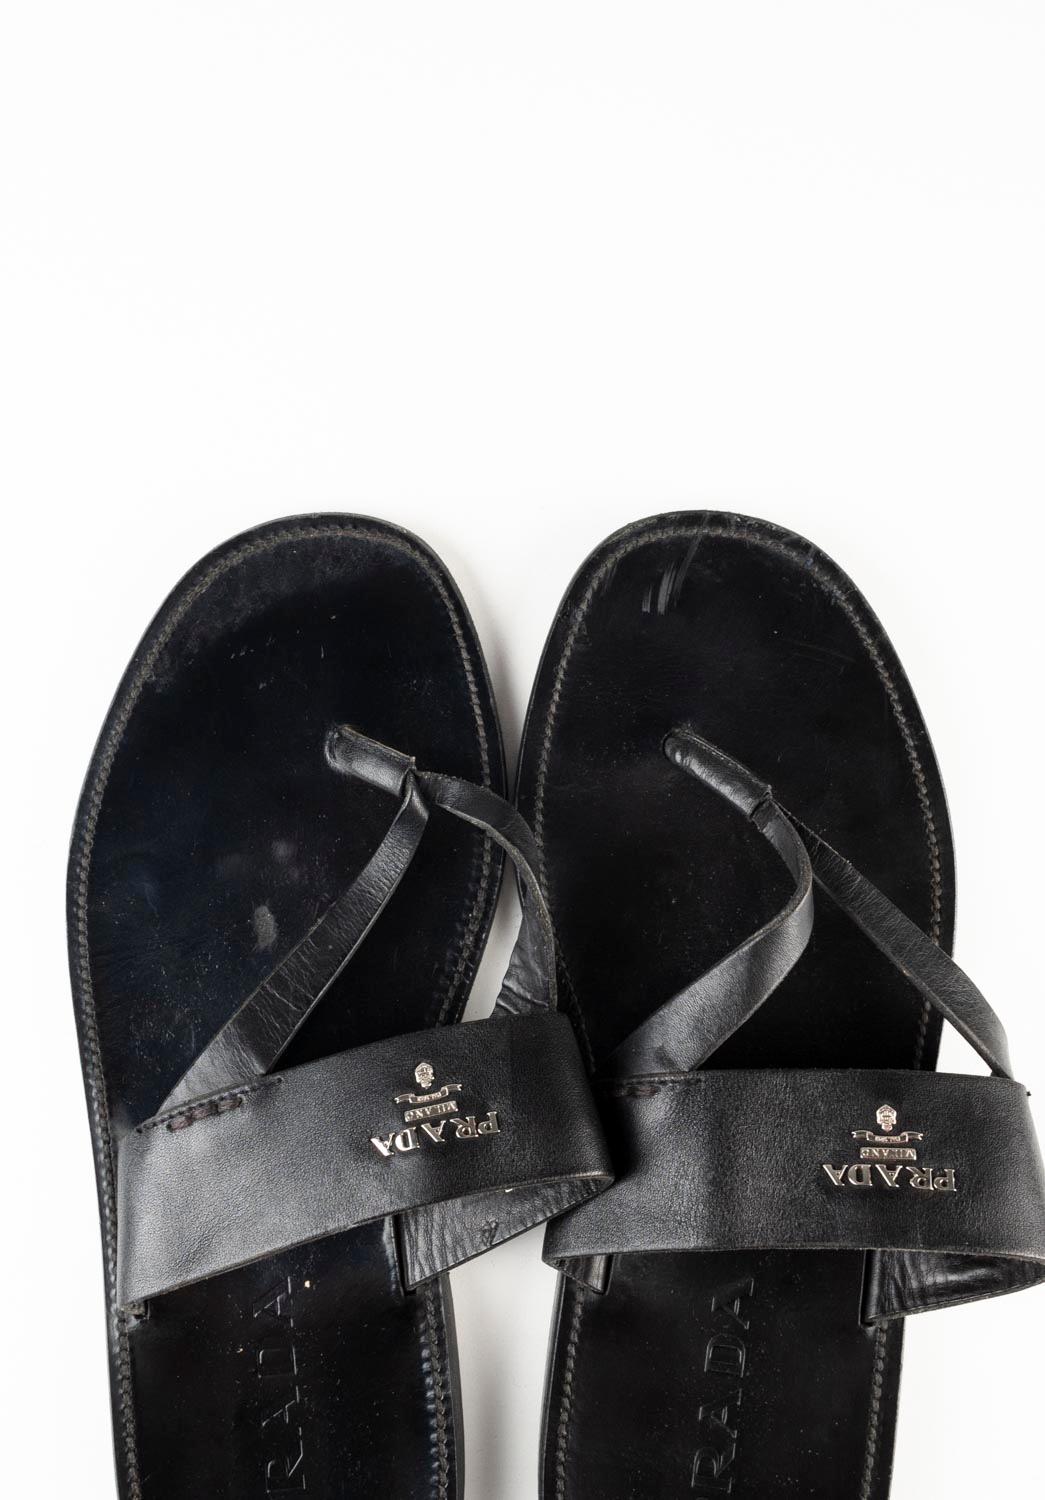 Men's Prada Slippers Leather Sandals Men Shoes Size UK7 EUR41, USA 8, S614 For Sale